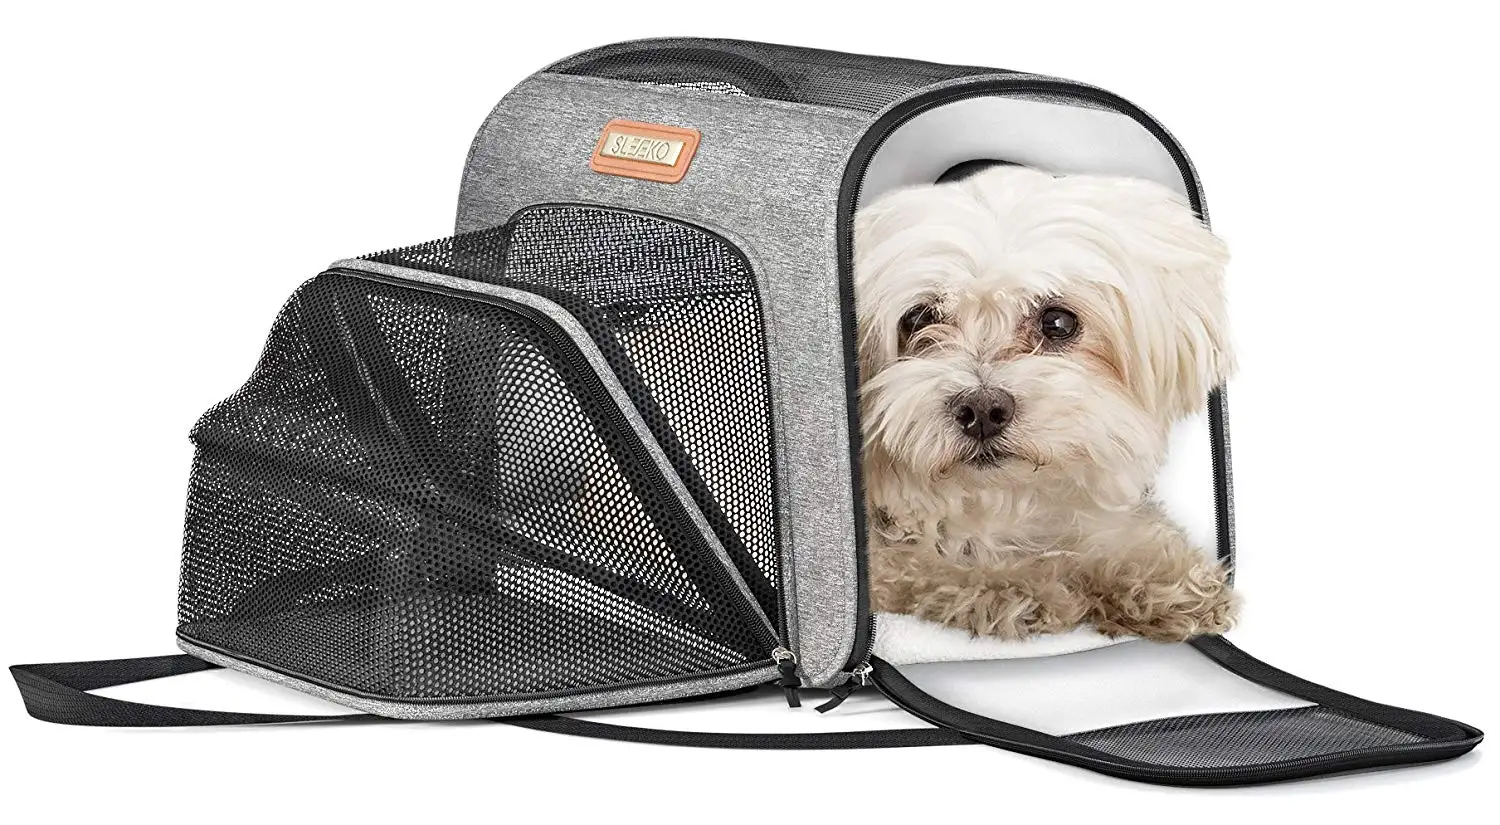 SLEEKO Luxury Pet Carrier Airline Approved Premium Under Seat Compatibility for Dogs and Cats Soft Sided Portable Airplane Tote Bag Backpack with 2 Fleece Pads and Storage Case